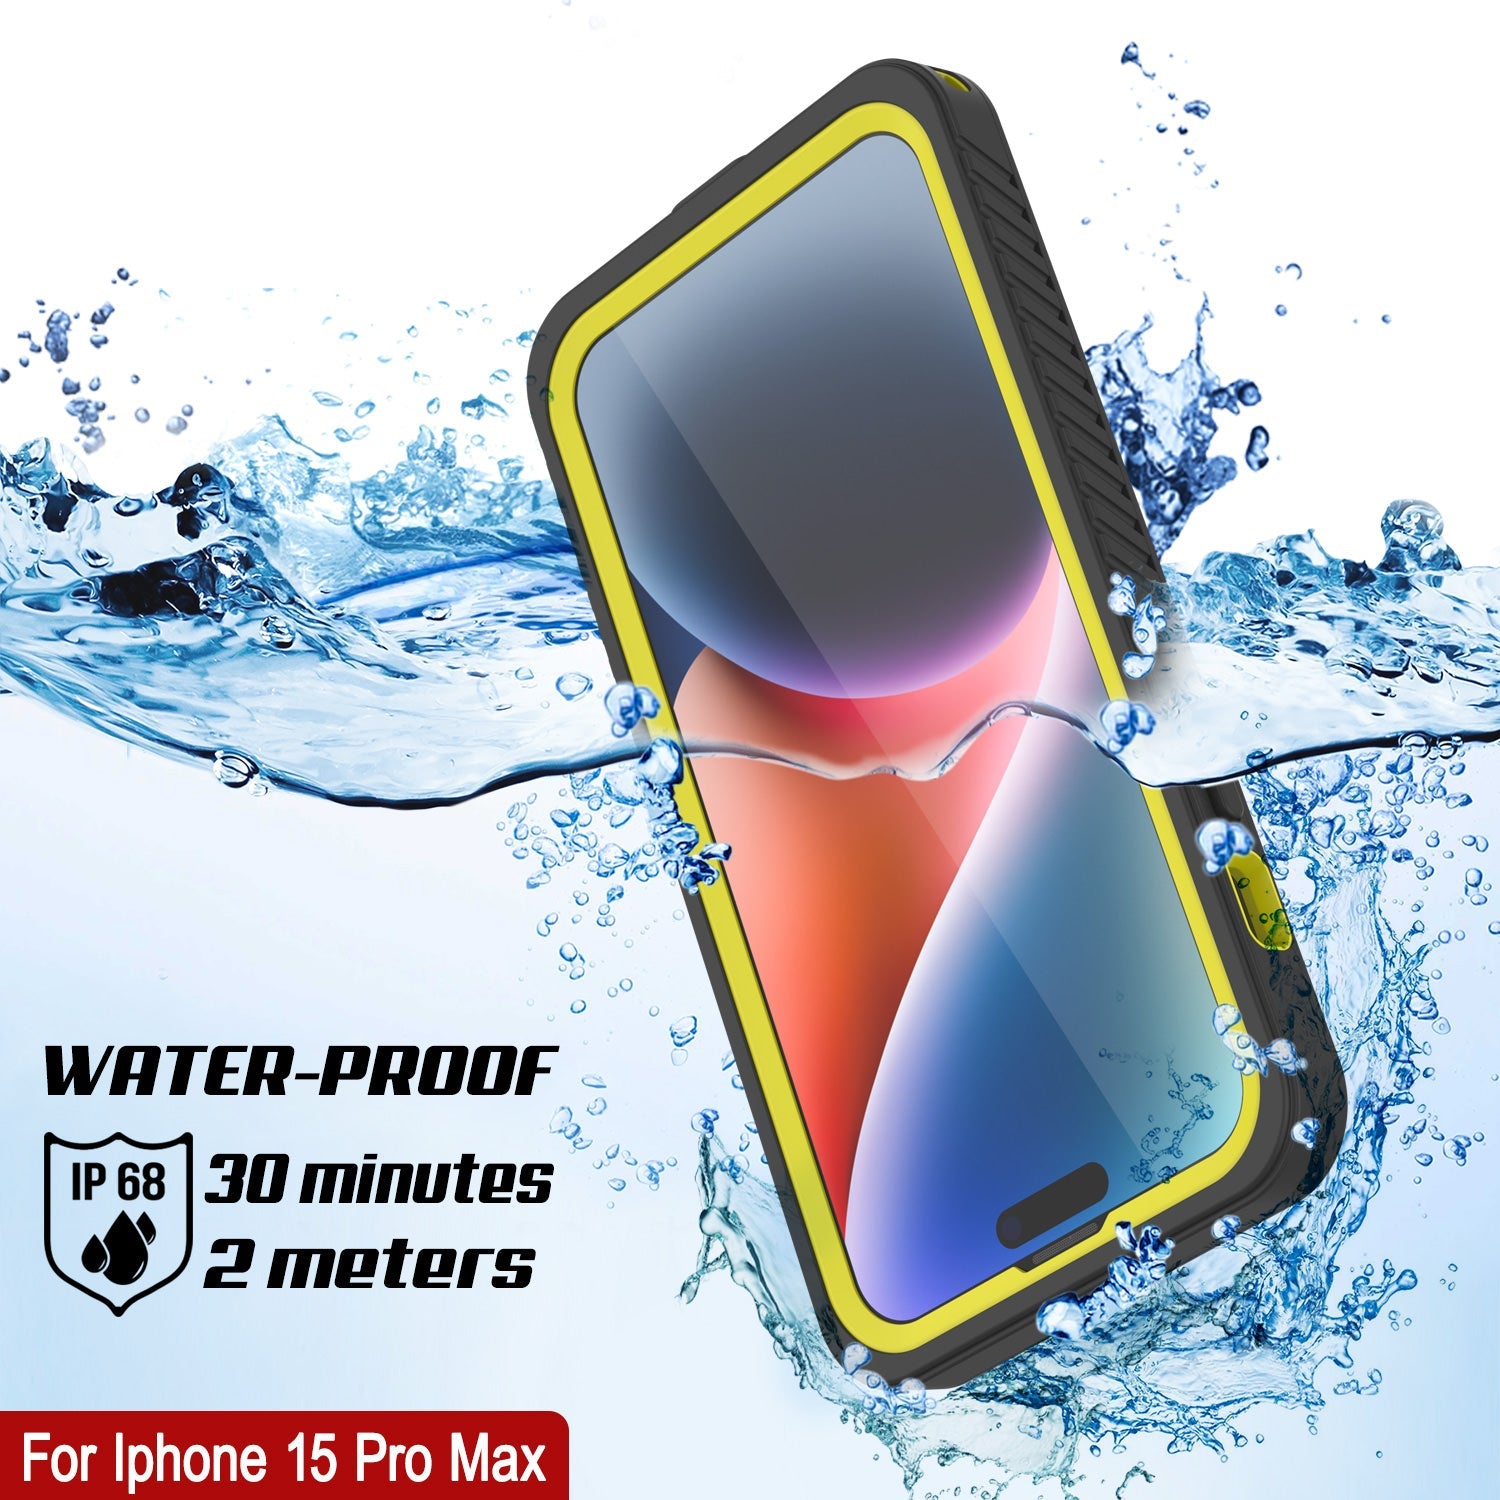 iPhone 15 Pro Max Waterproof Case, Punkcase [Extreme Series] Armor Cover W/ Built In Screen Protector [Yellow]